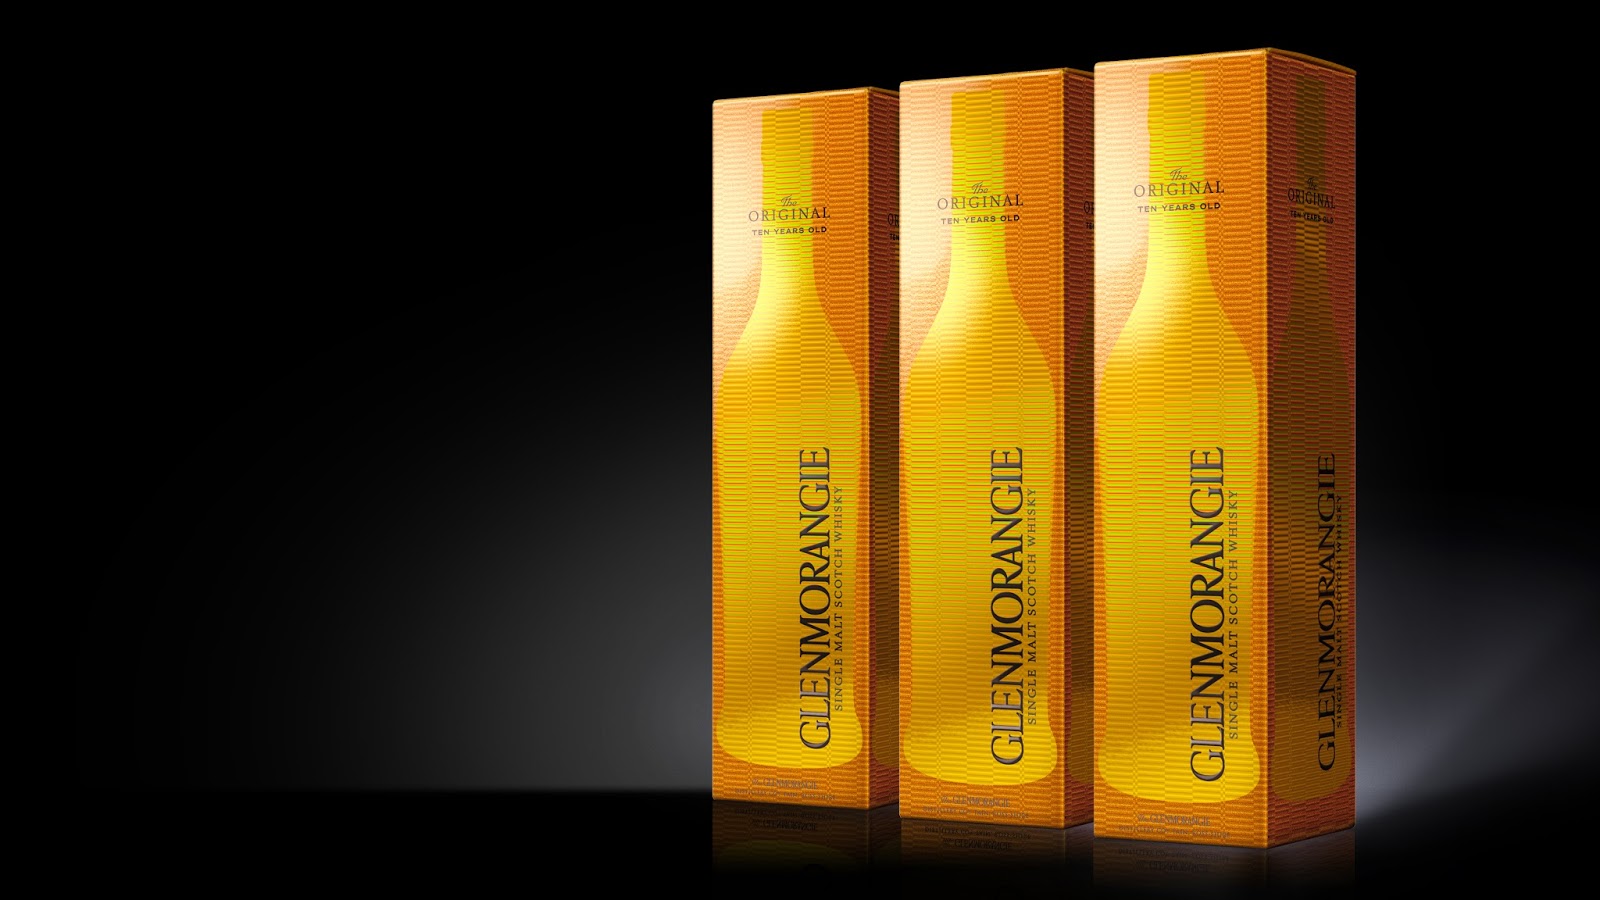 Glenmorangie Original Limited Edition Festive Pack – Packaging Of The World